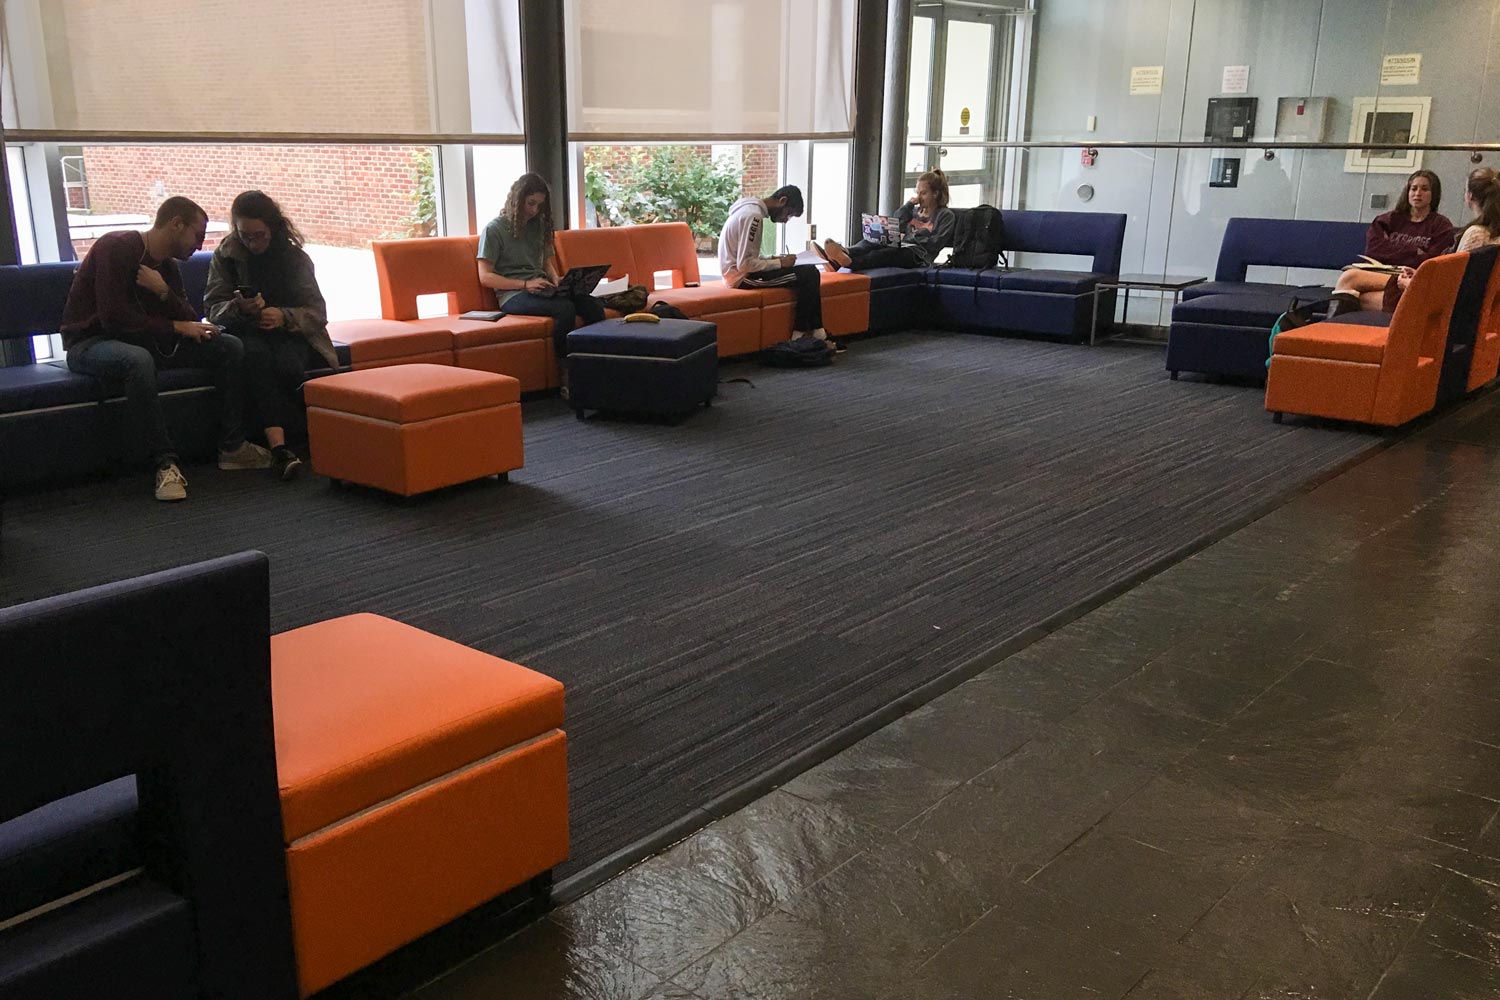 Students spread out on the comfy Argo Tea furniture.